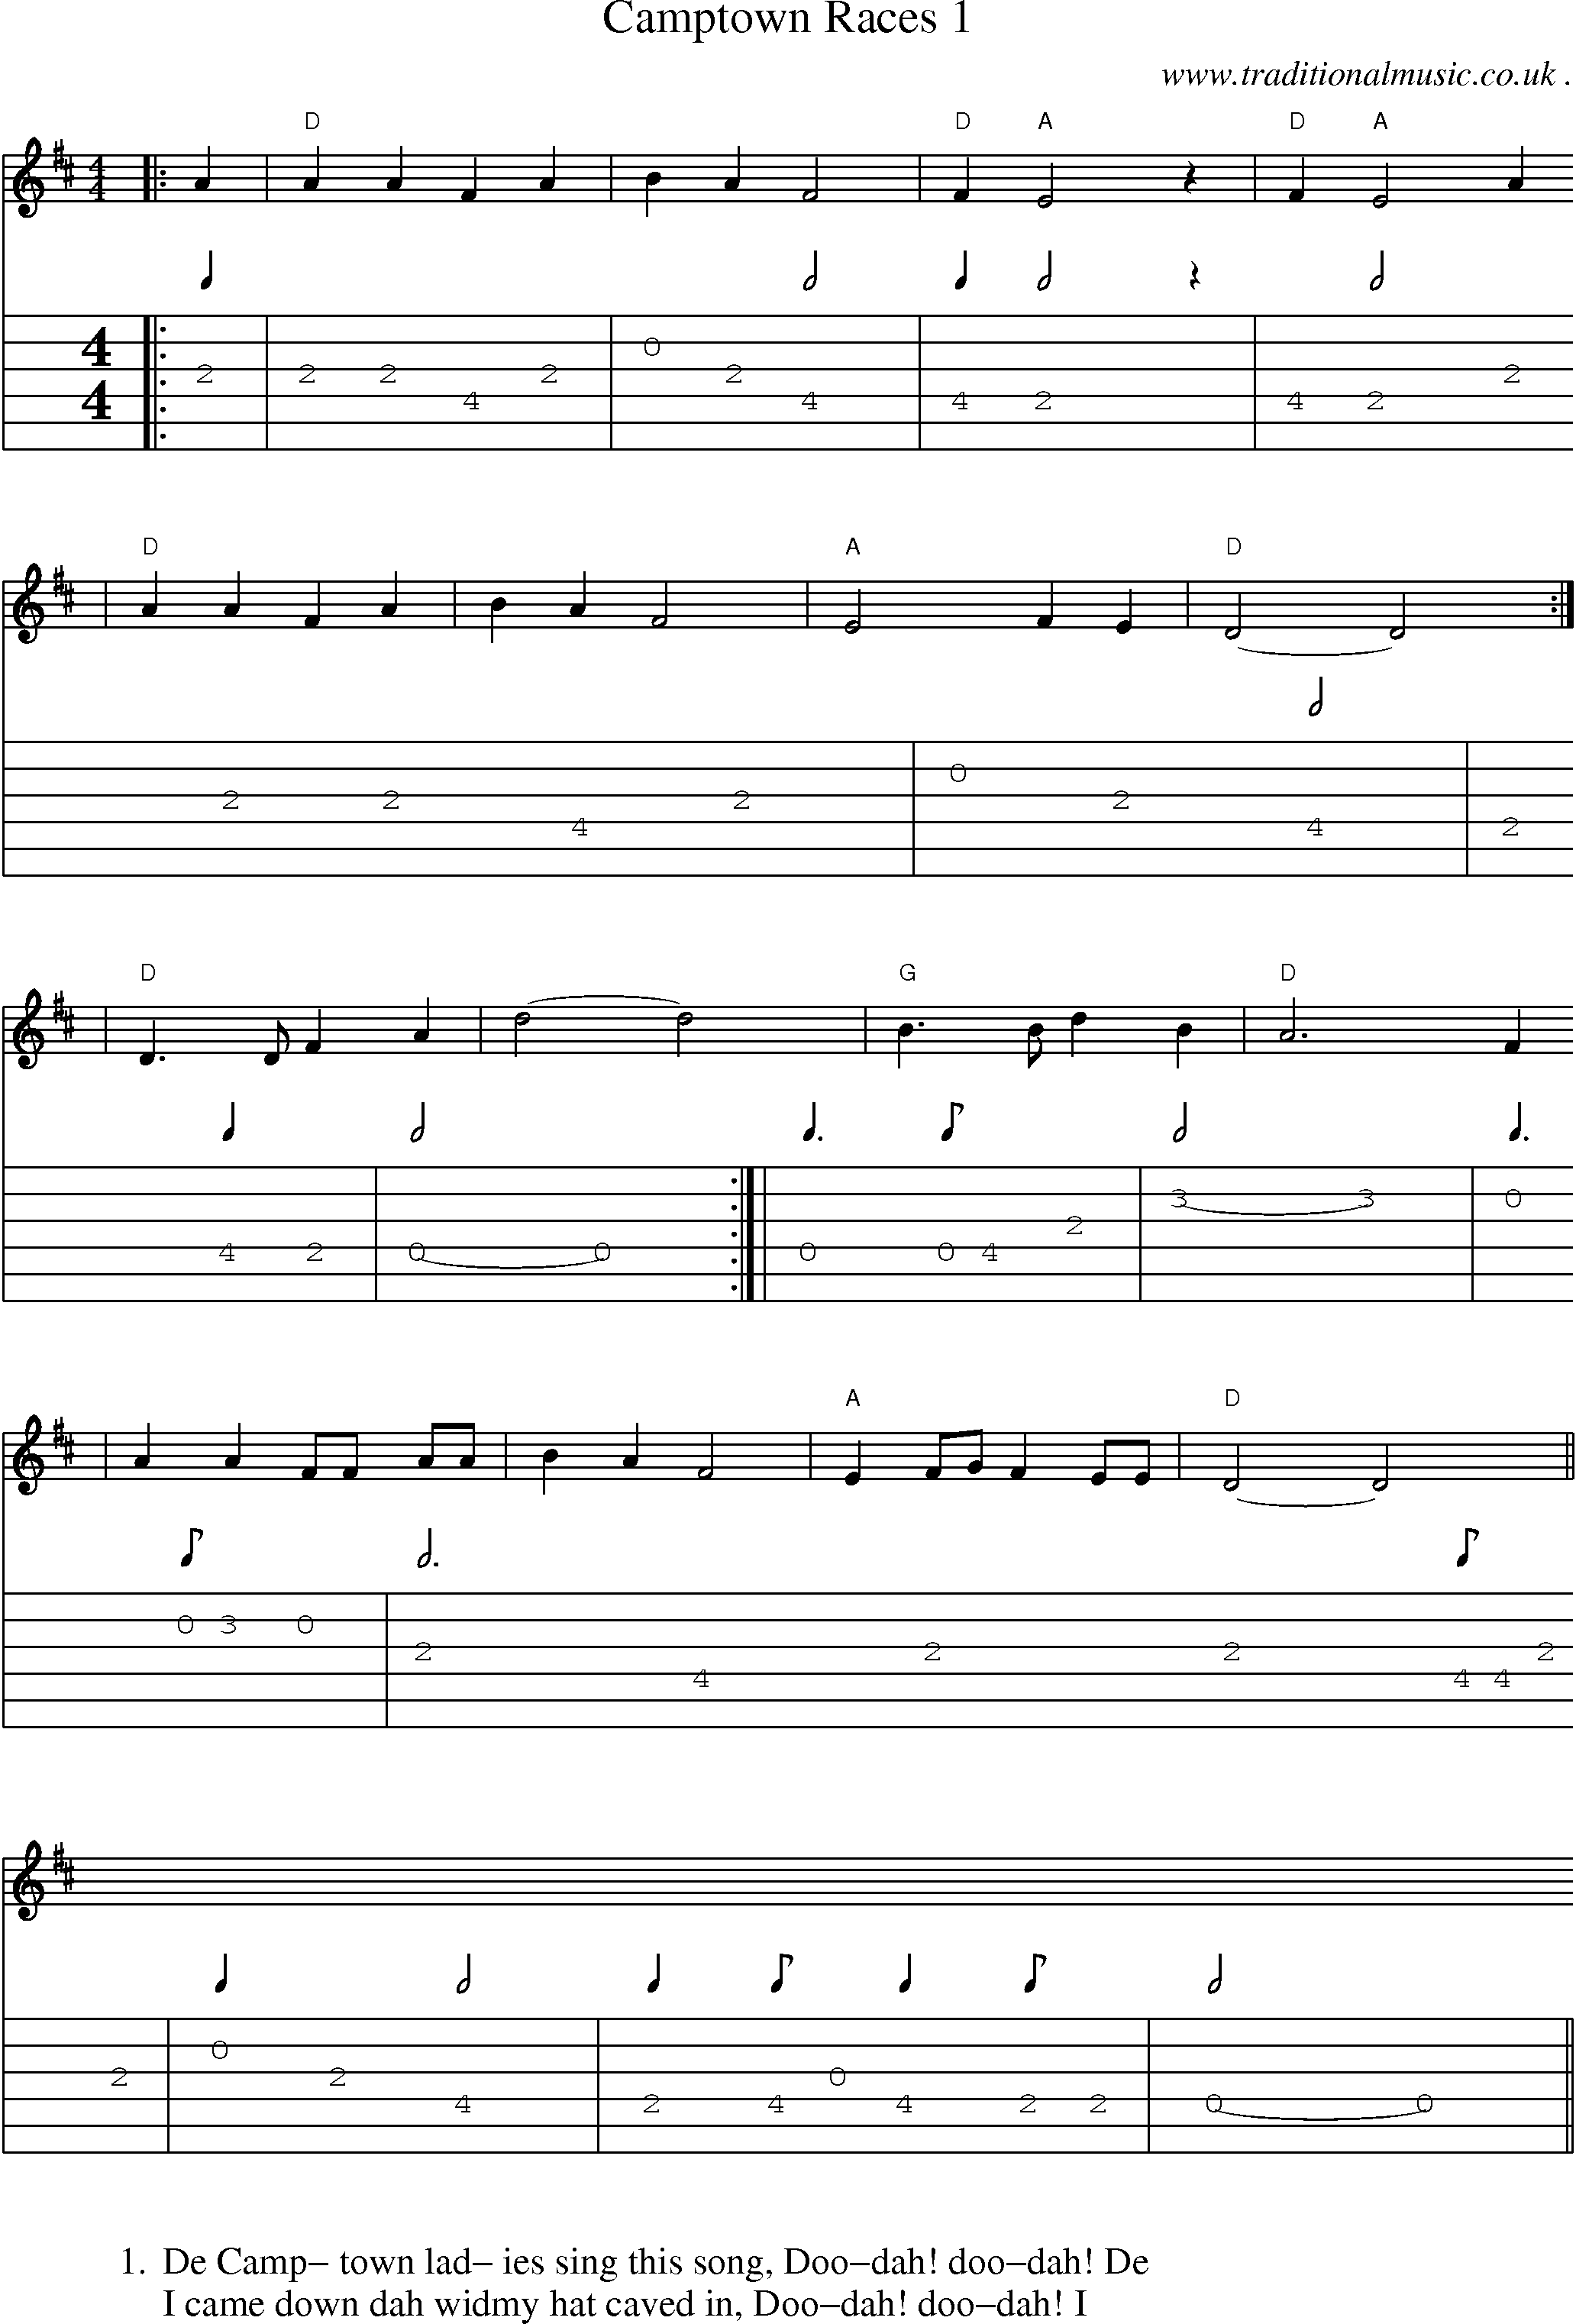 Music Score and Guitar Tabs for Camptown Races 1